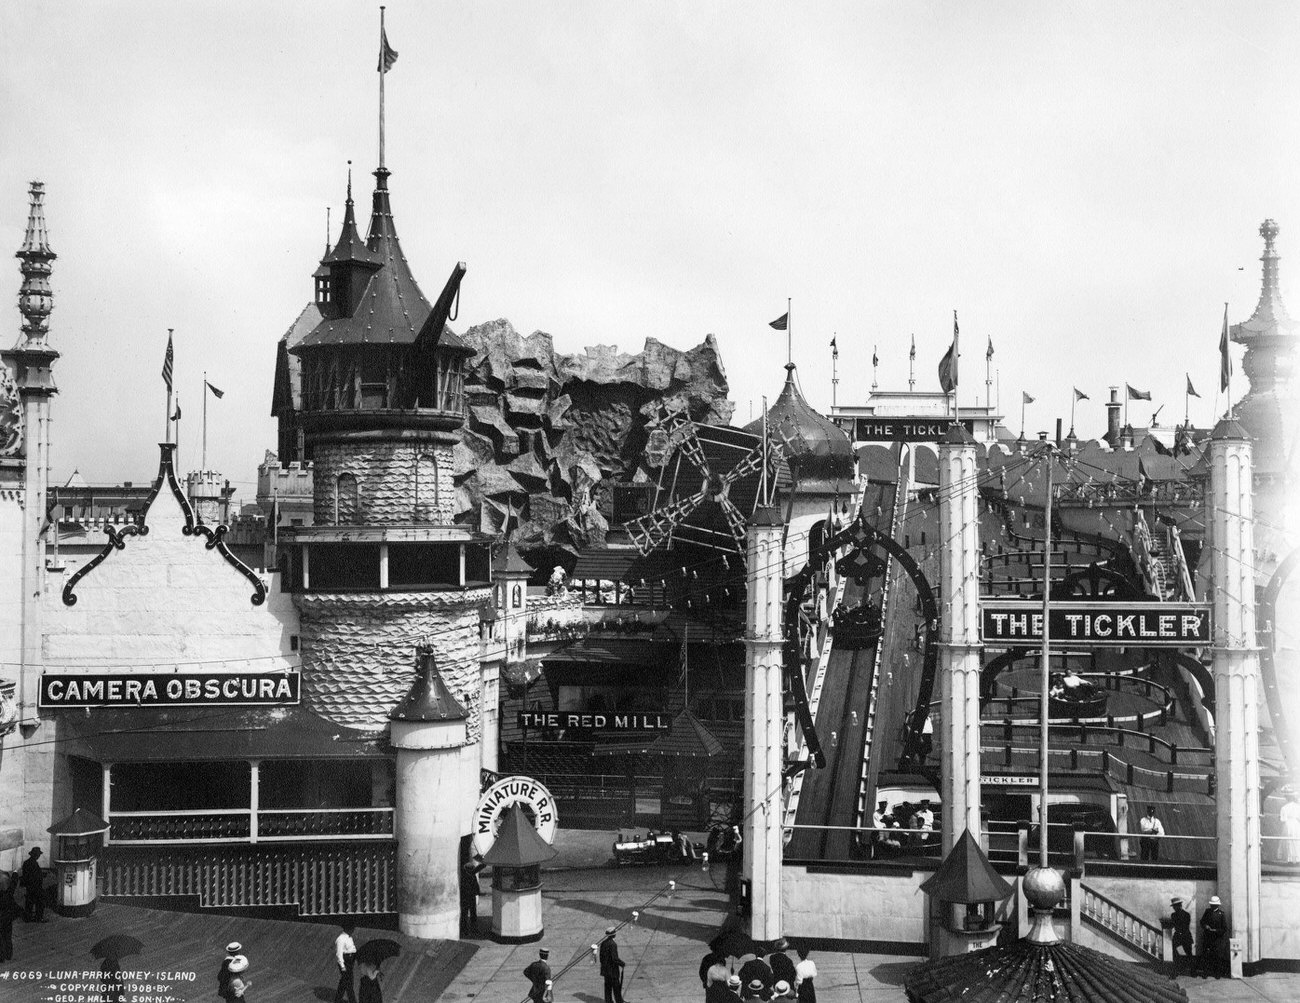 Luna Park Highlights: Camera Obscura, Miniature Railroad, Red Mill, And Tickler, 1908